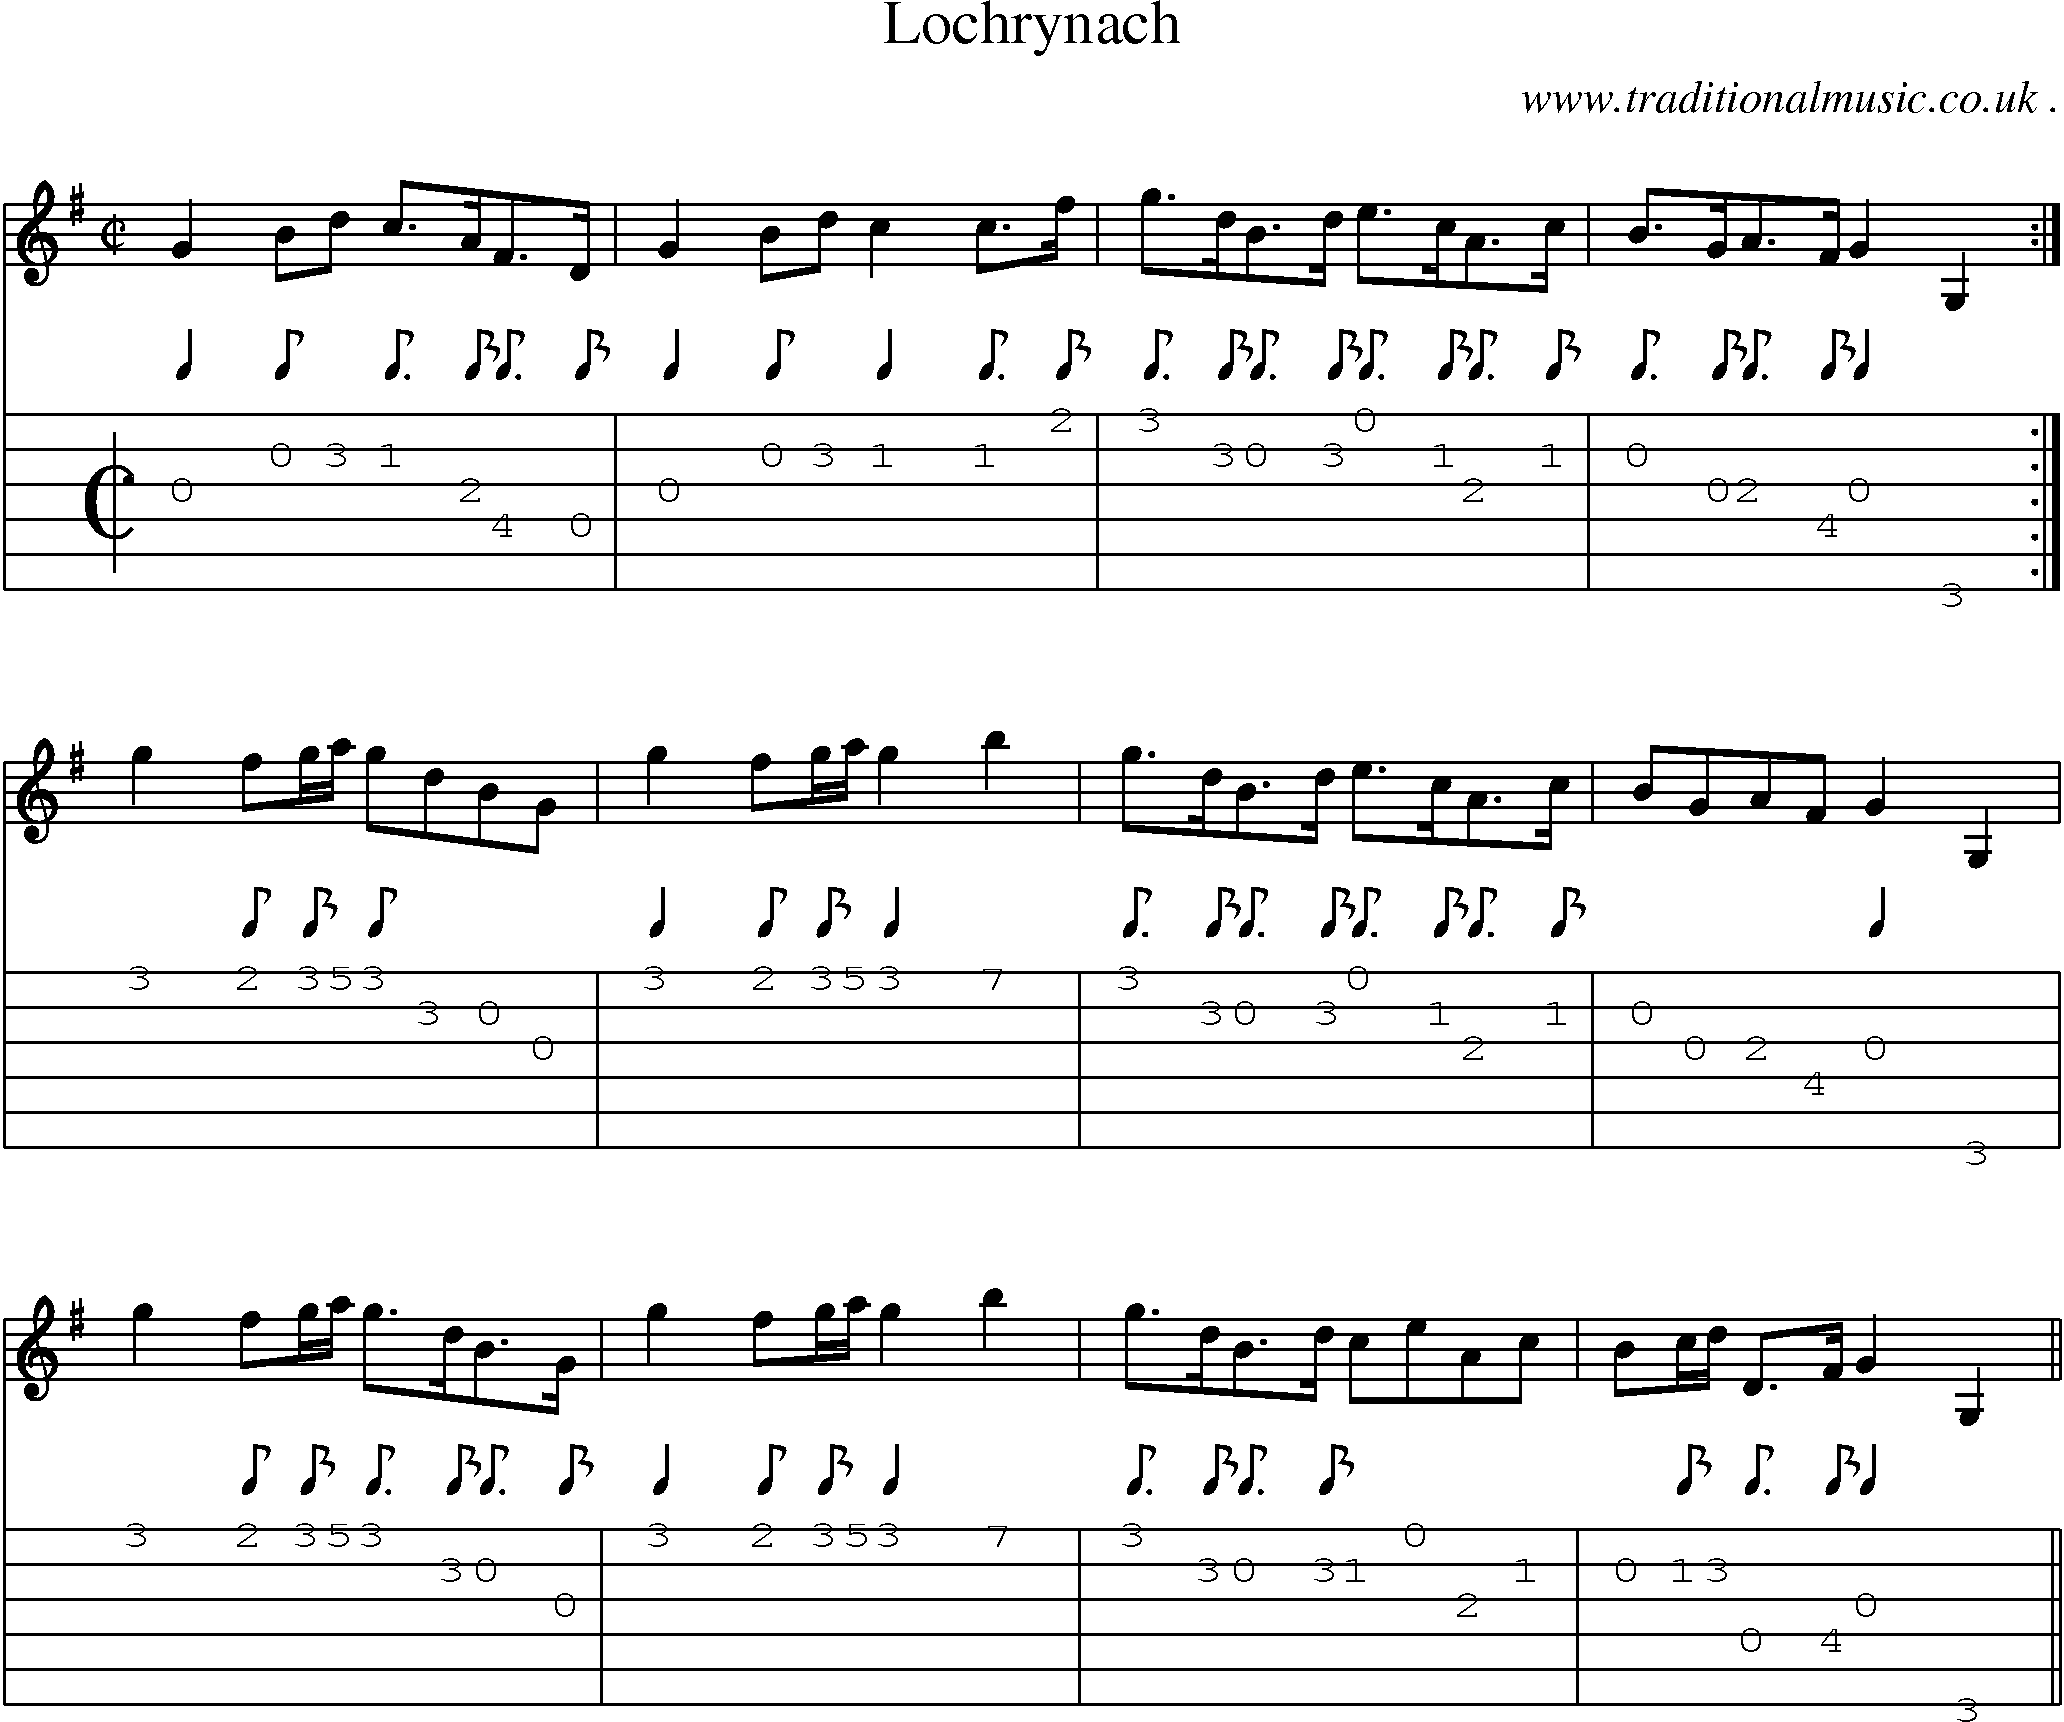 Sheet-music  score, Chords and Guitar Tabs for Lochrynach